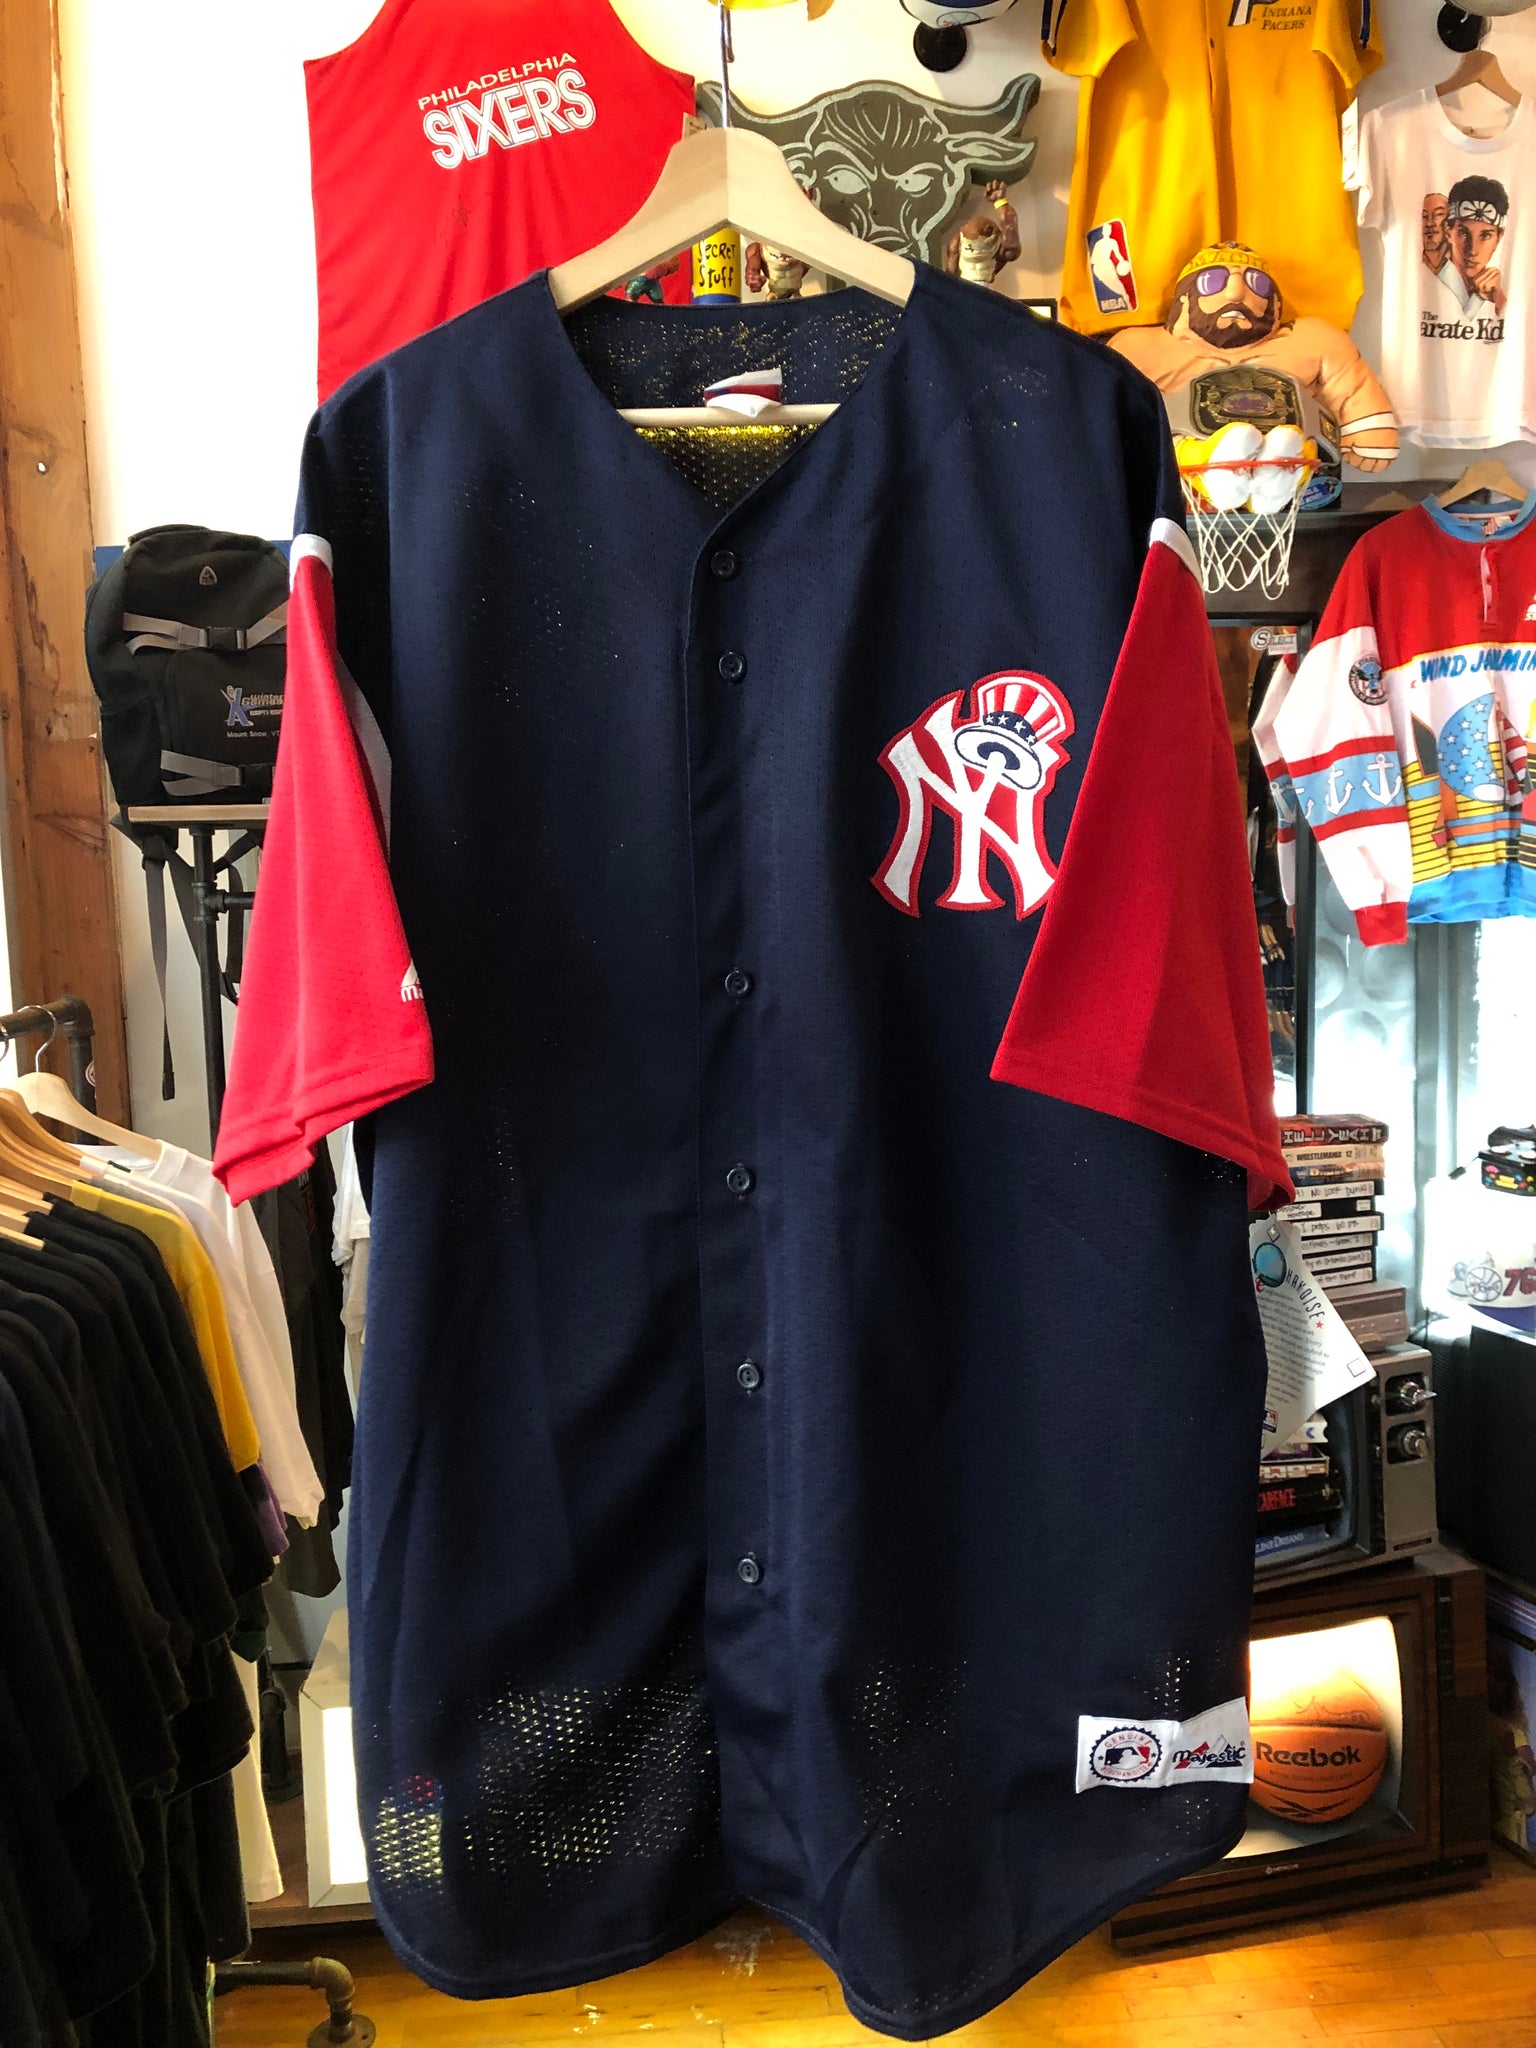 Vintage New York Yankees Jersey By Majestic